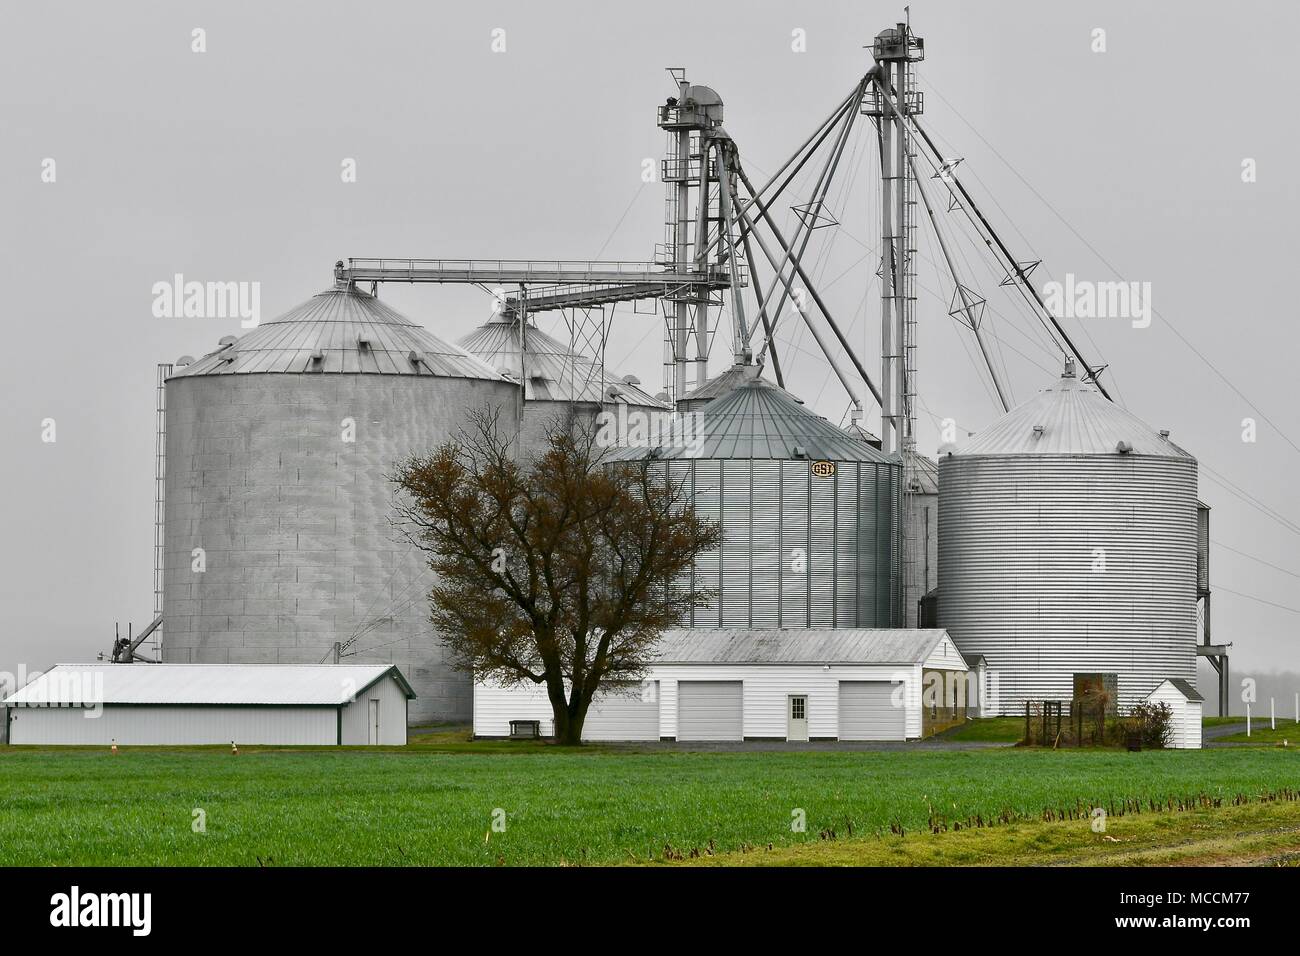 Large silos on a farm in Maryland, USA Stock Photo